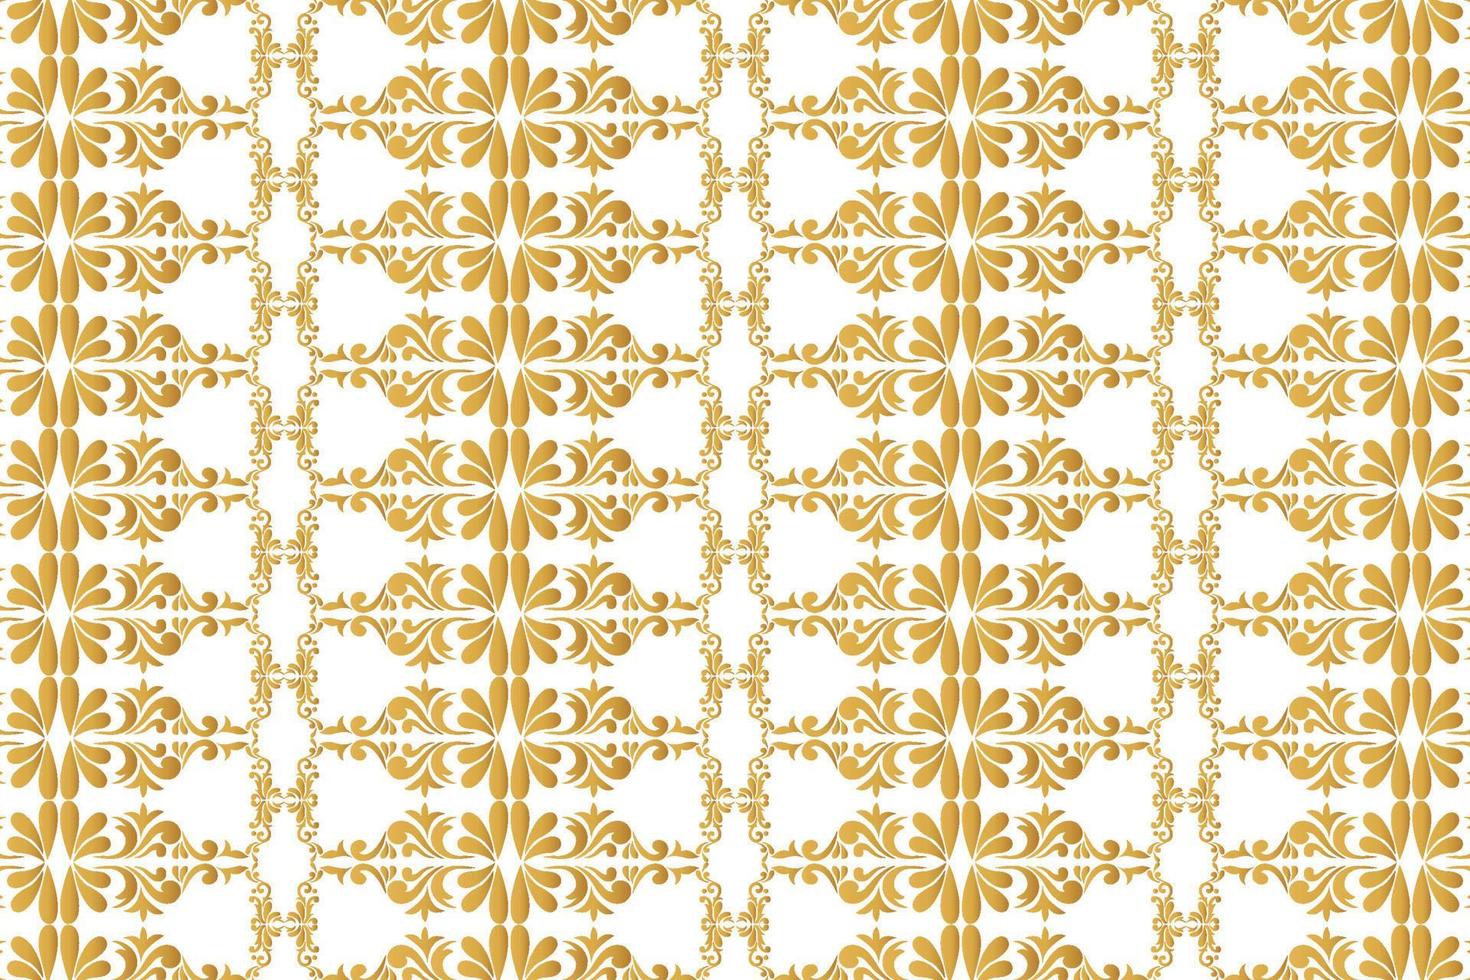 Beautiful decorative golden floral pattern background vector